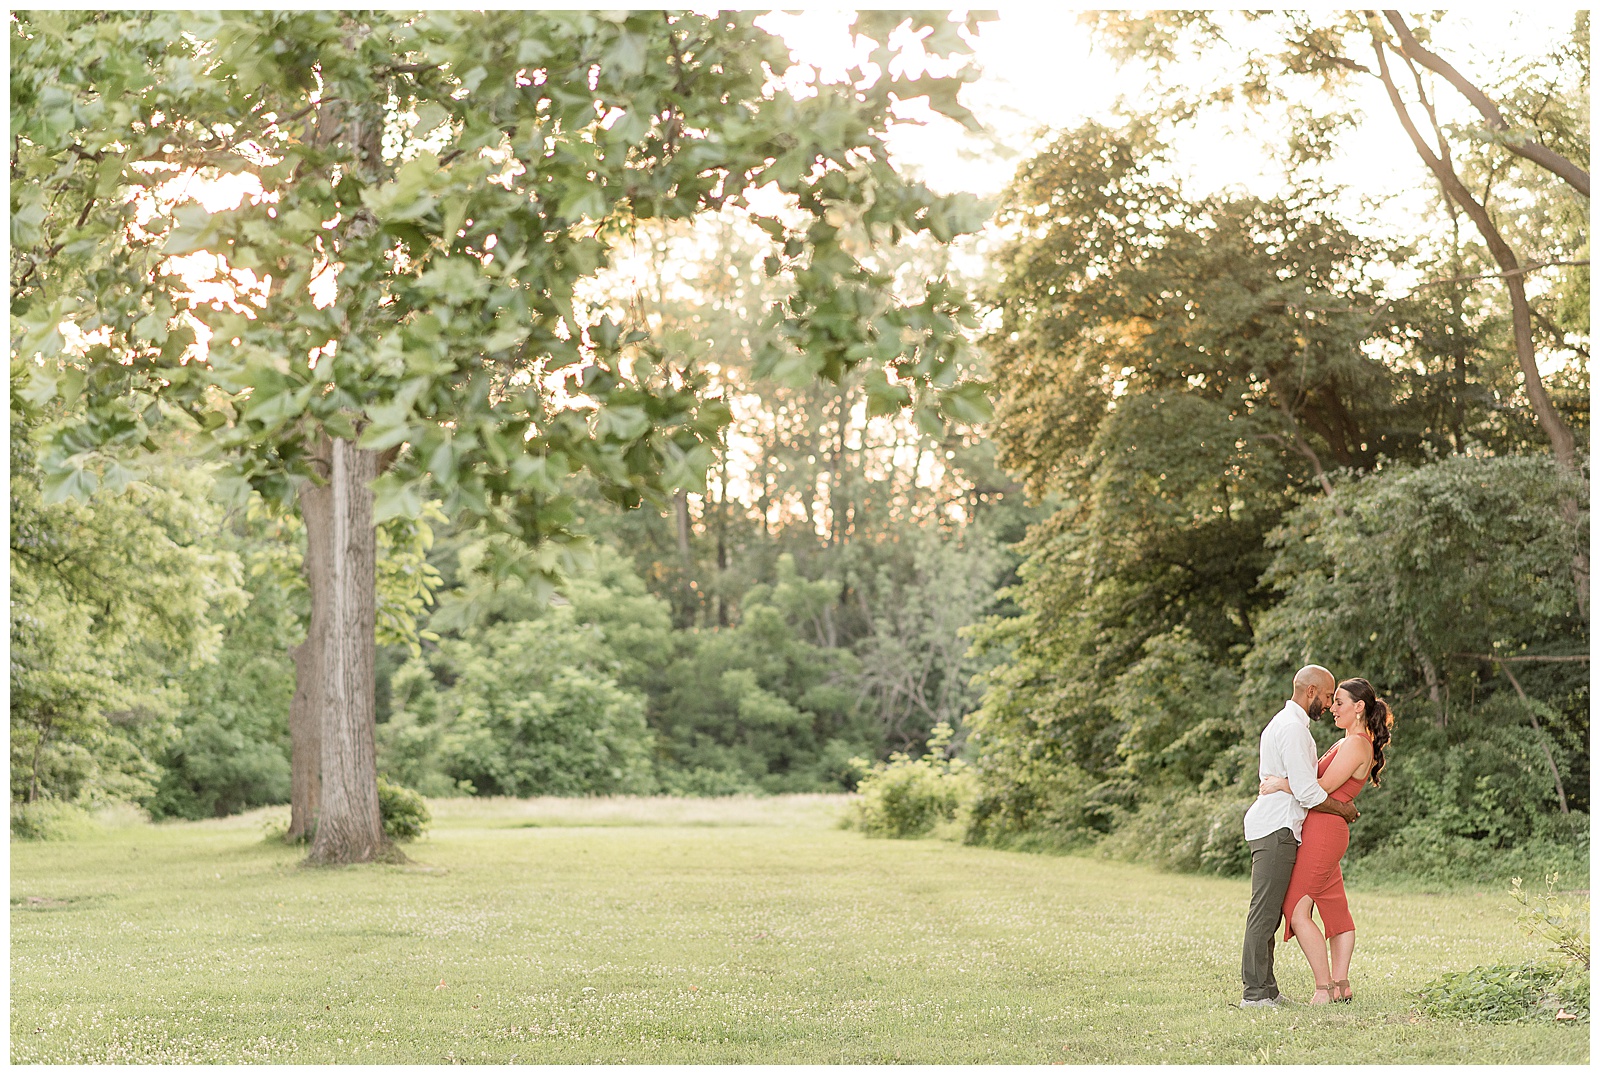 guy kisses girl on forehead on right side of photo with trees behind them in doylestown pennsylvania